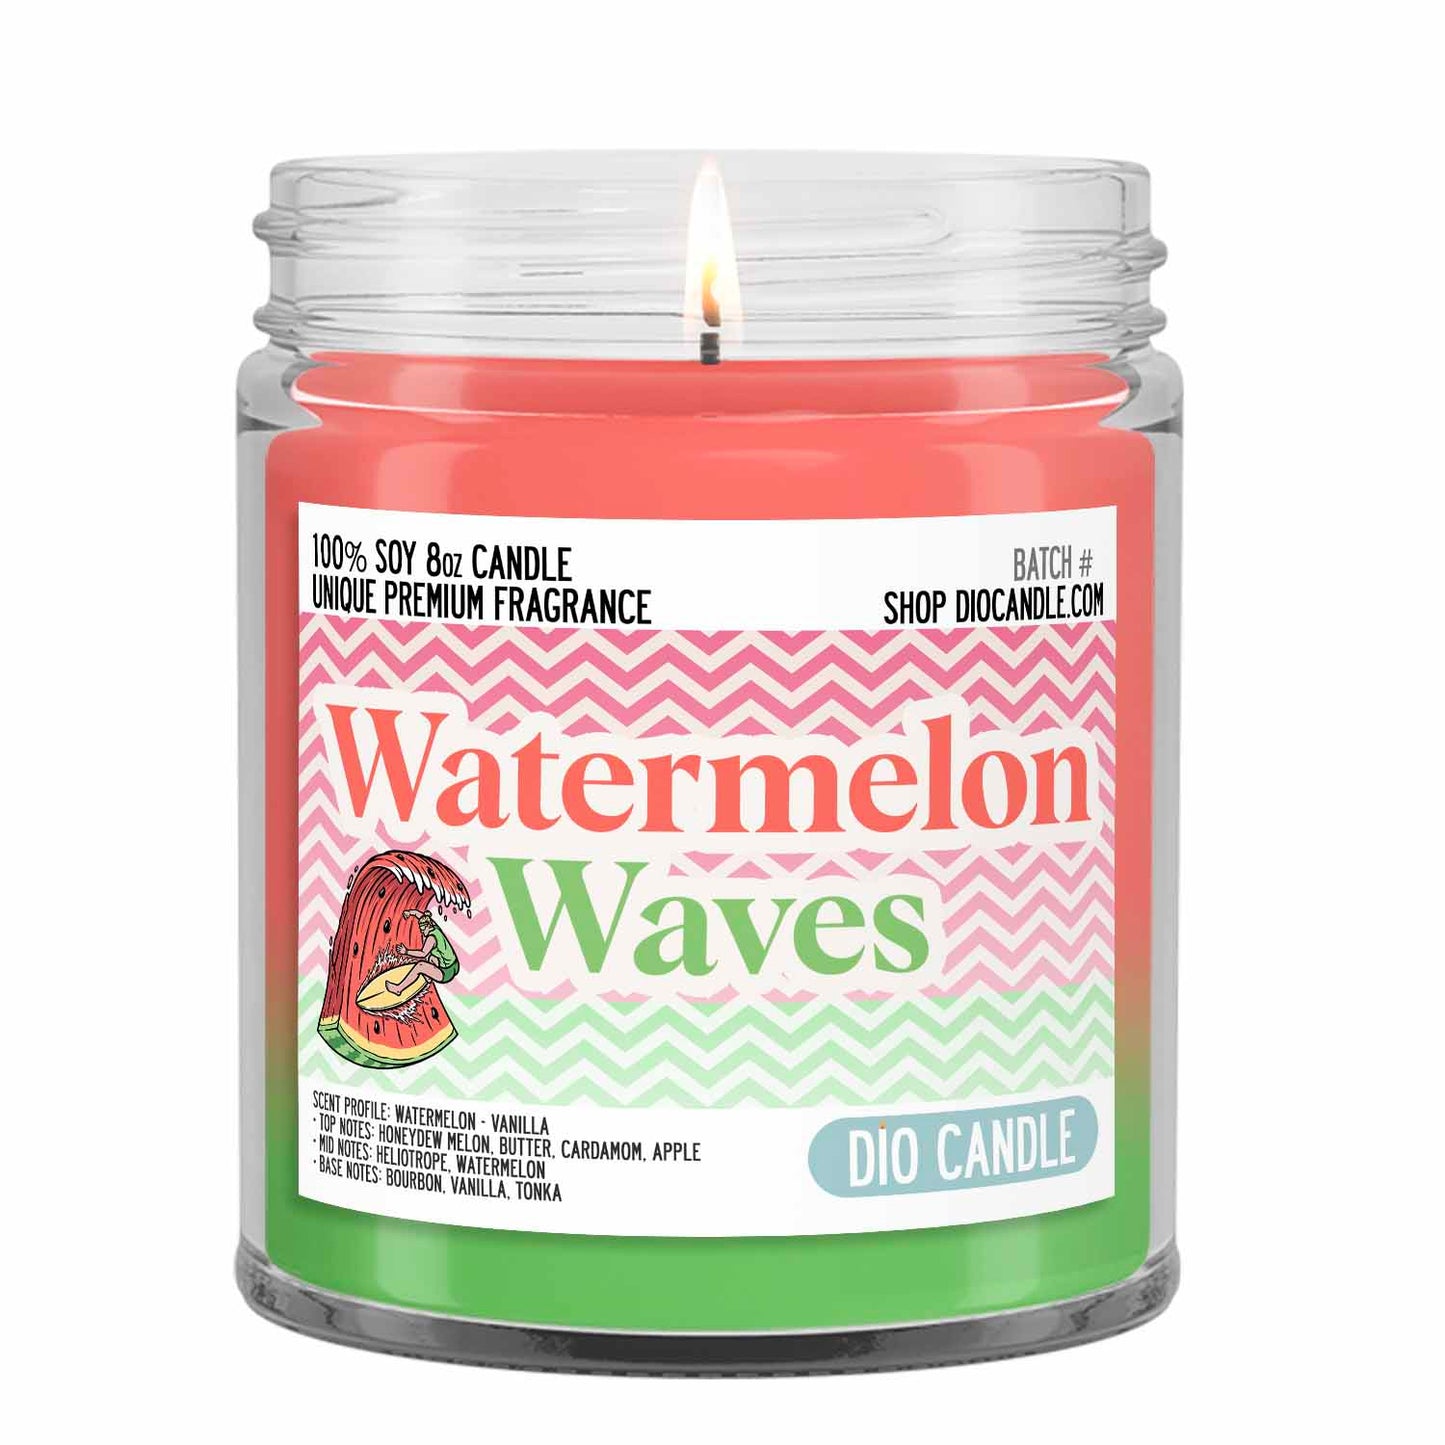 Watermelon Waves Candle